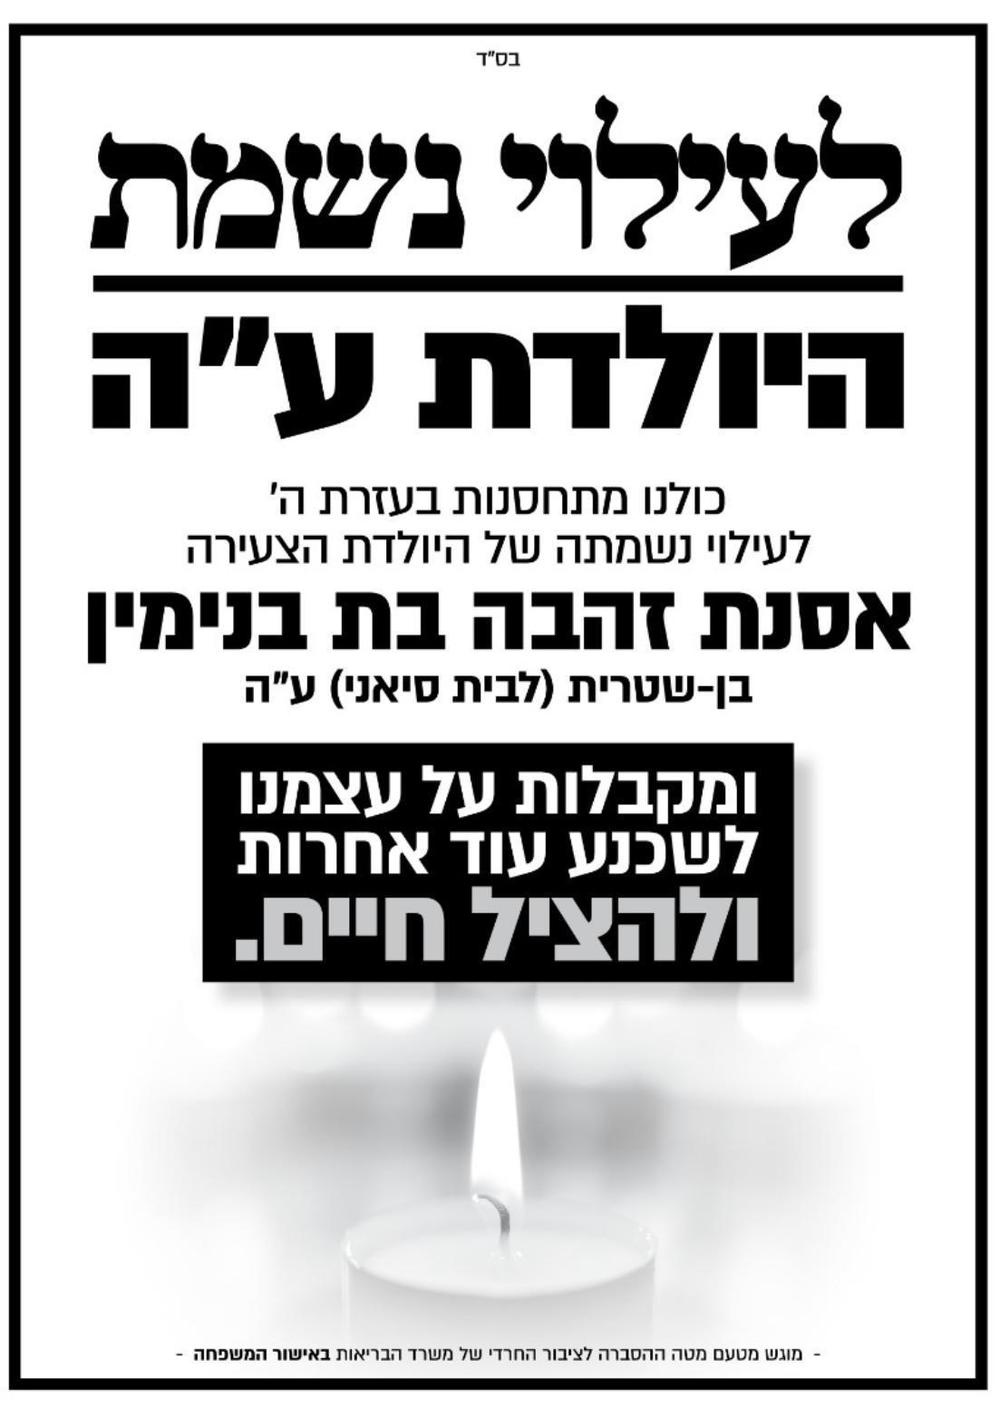 A poster campaign by Israel's Health Ministry calls on women to get vaccinated in memory of Osnat Ben Sheetrit, a pregnant woman who did not get vaccinated and died of COVID-19.